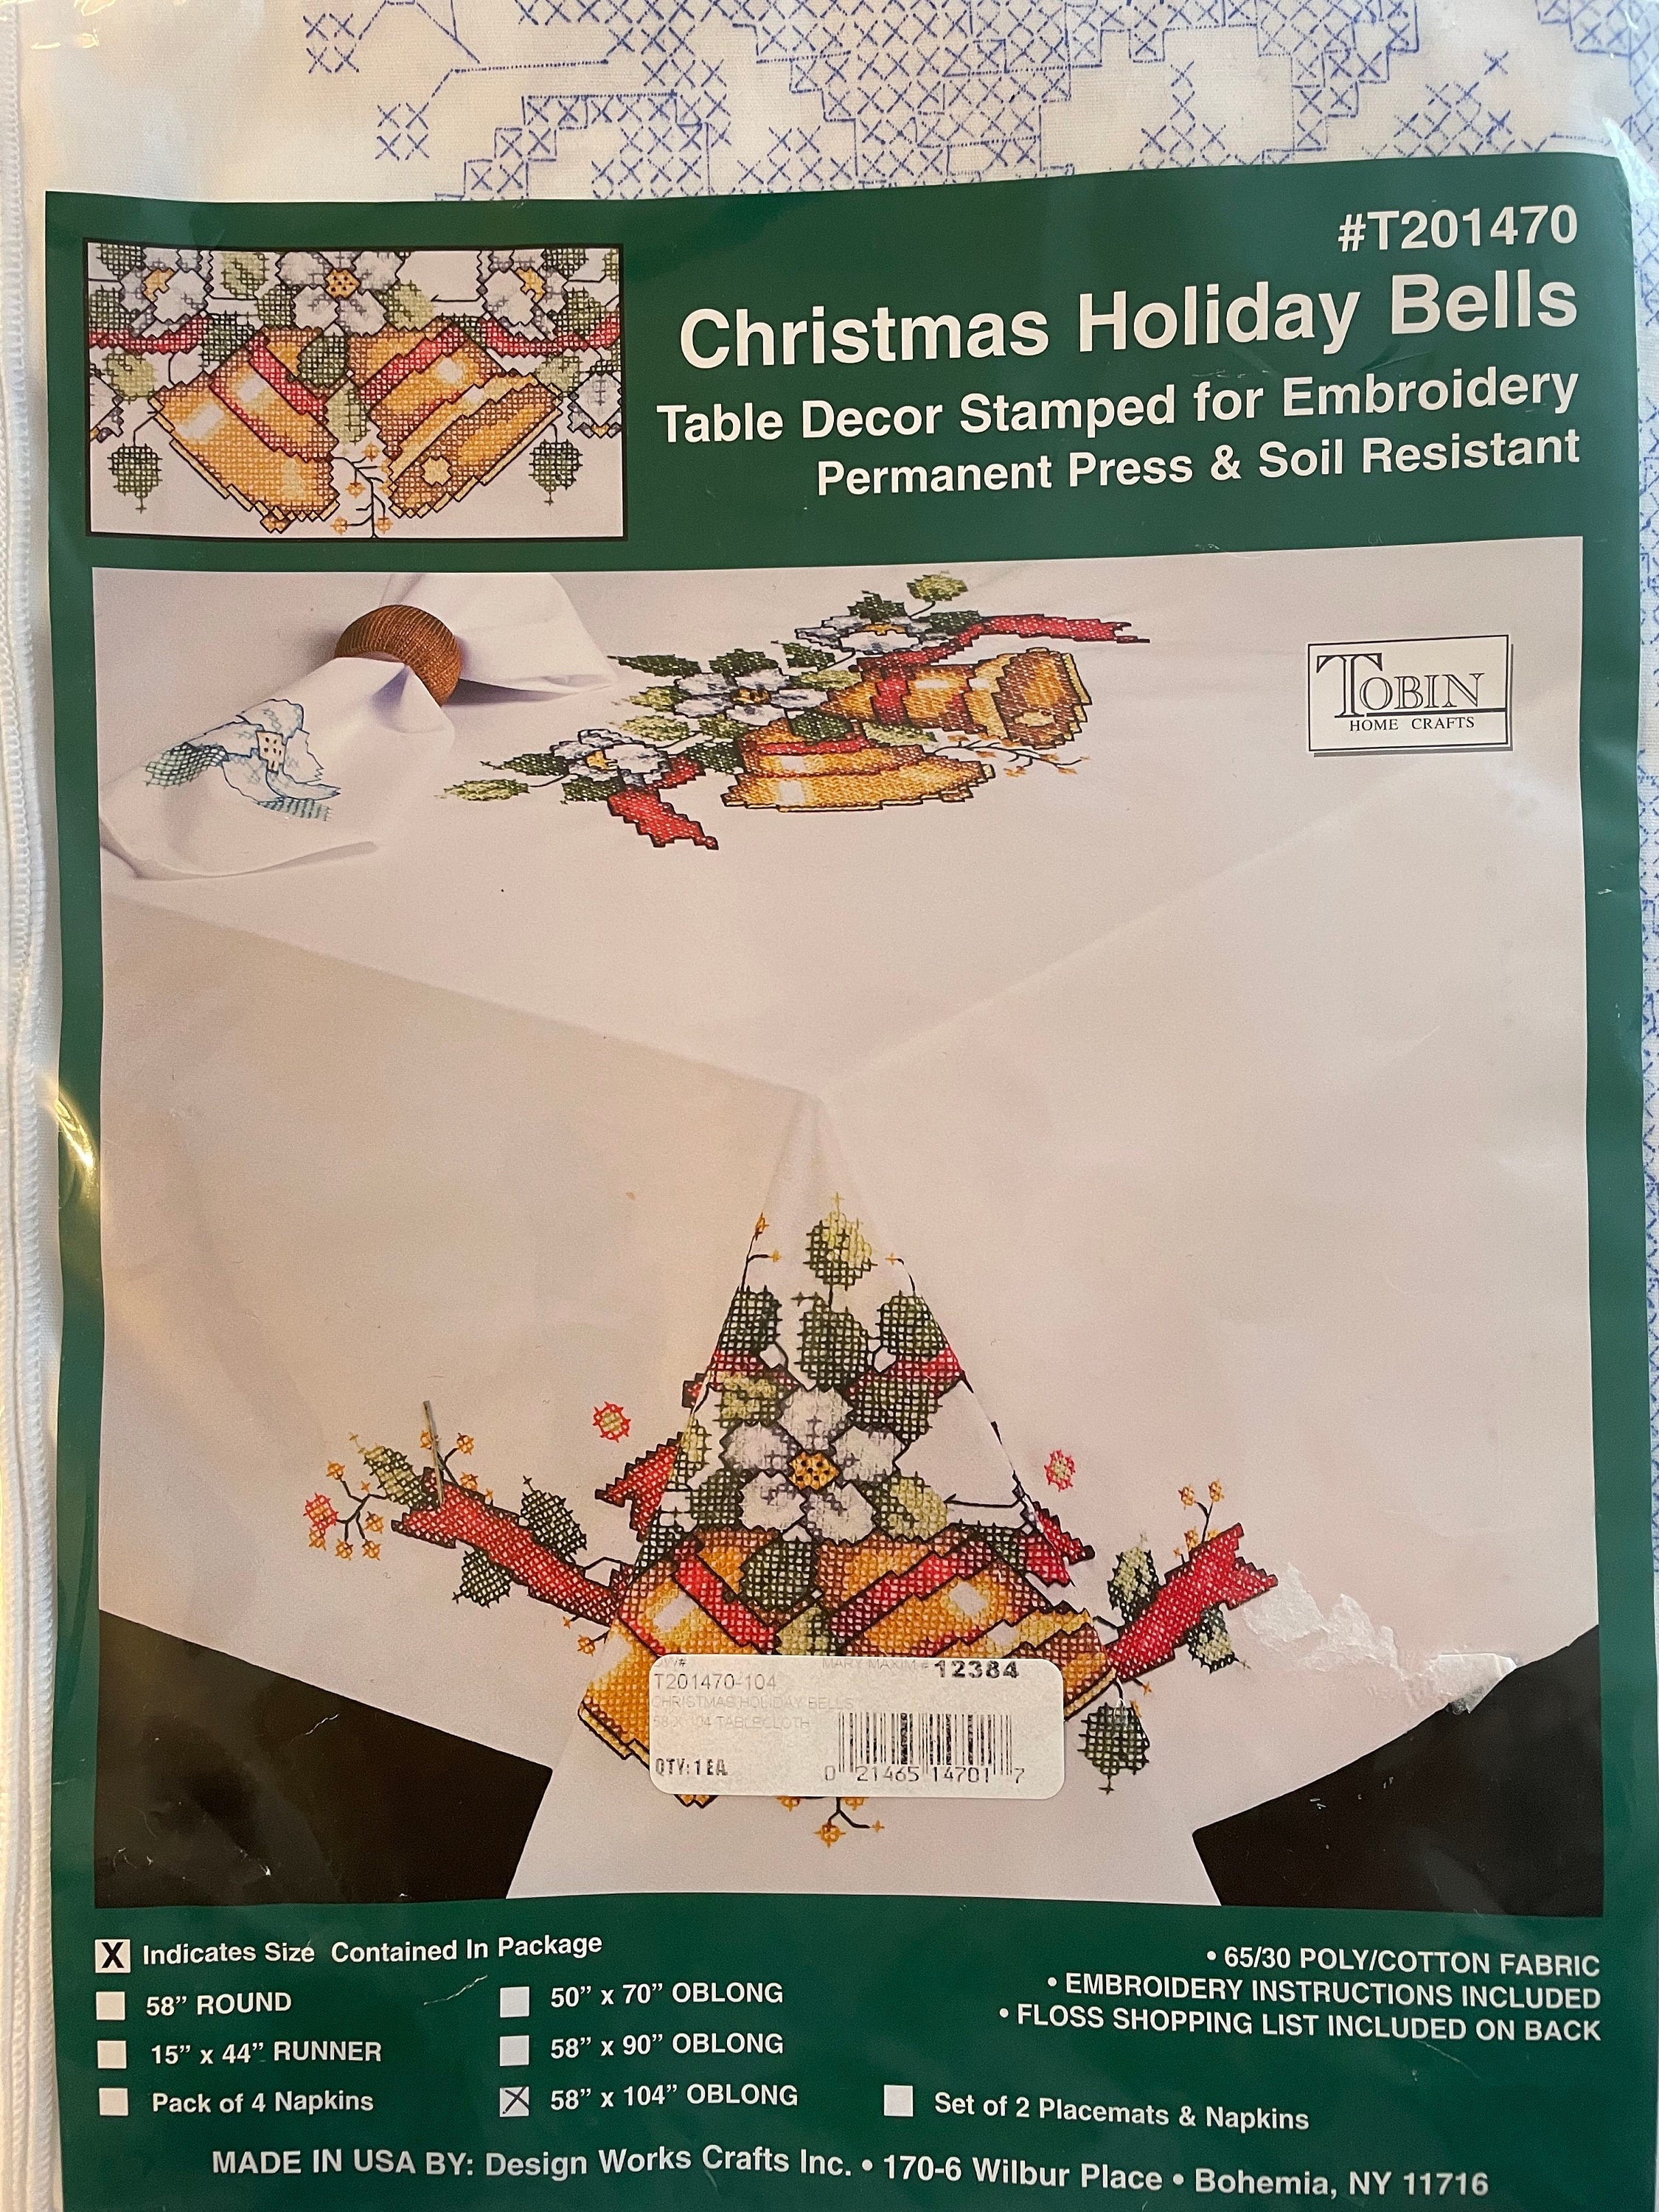 Yuletide Bells Stamped CrossStitch Table Cloth Kit Christmas Ornaments  Holiday Contemporary Stitchery Crafts